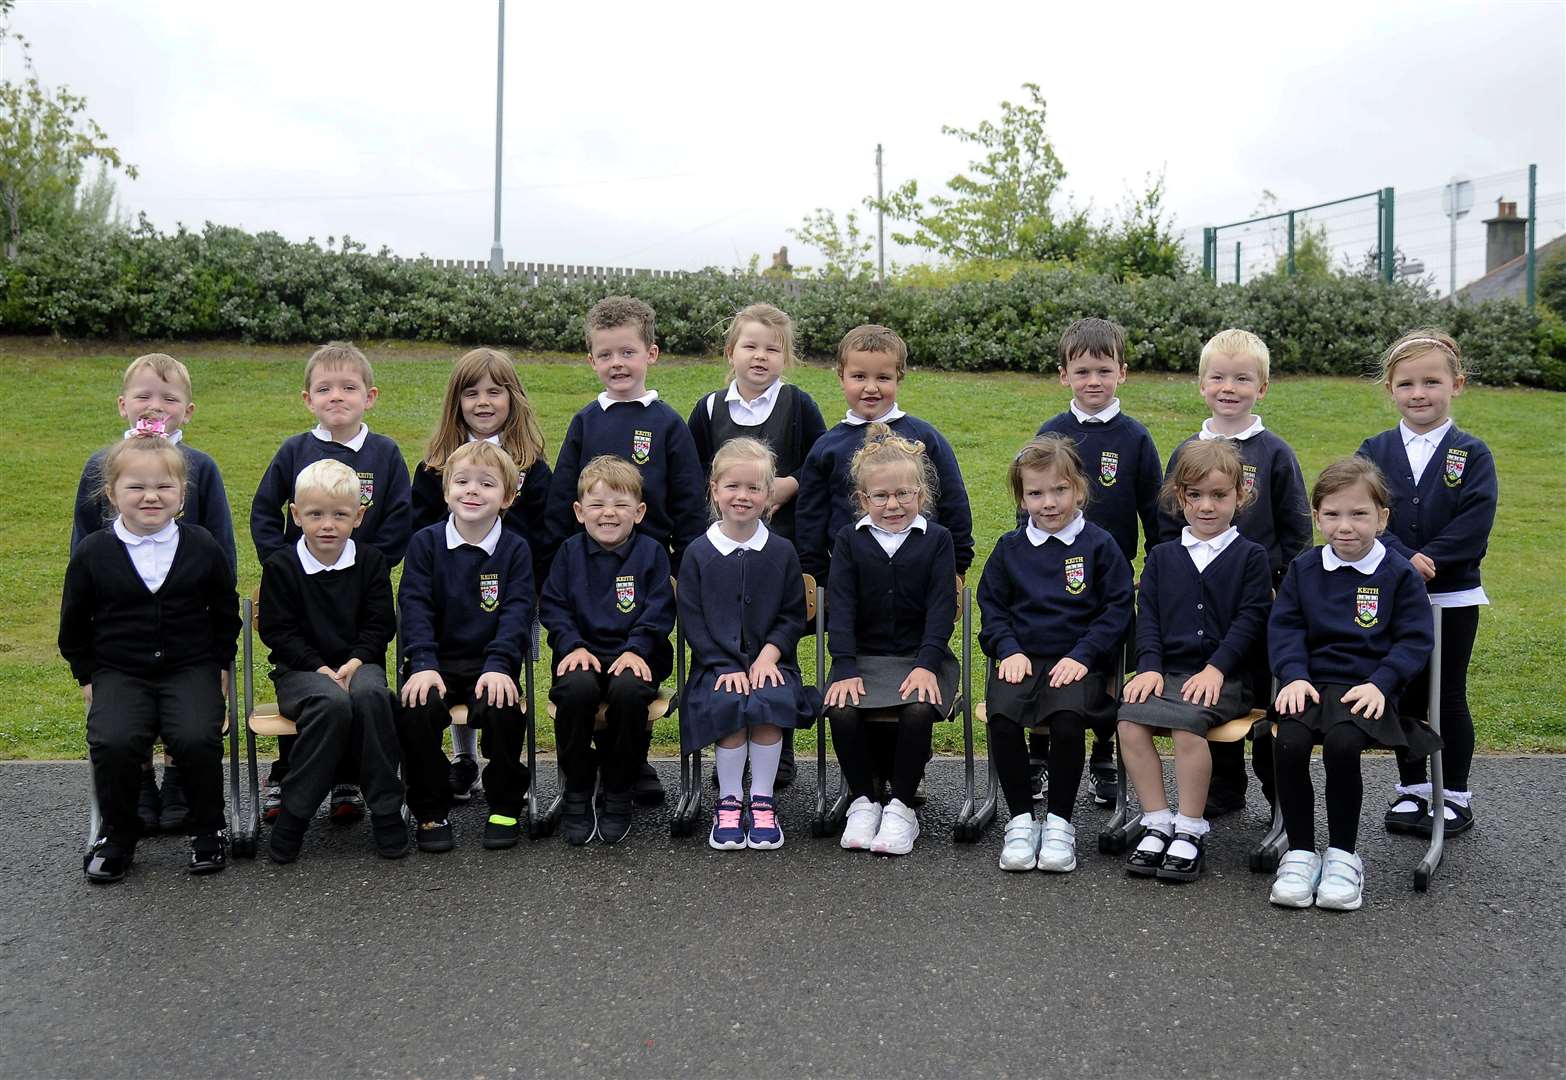 Happy smiling faces at Keith Primary School. Picture: Becky Saunderson